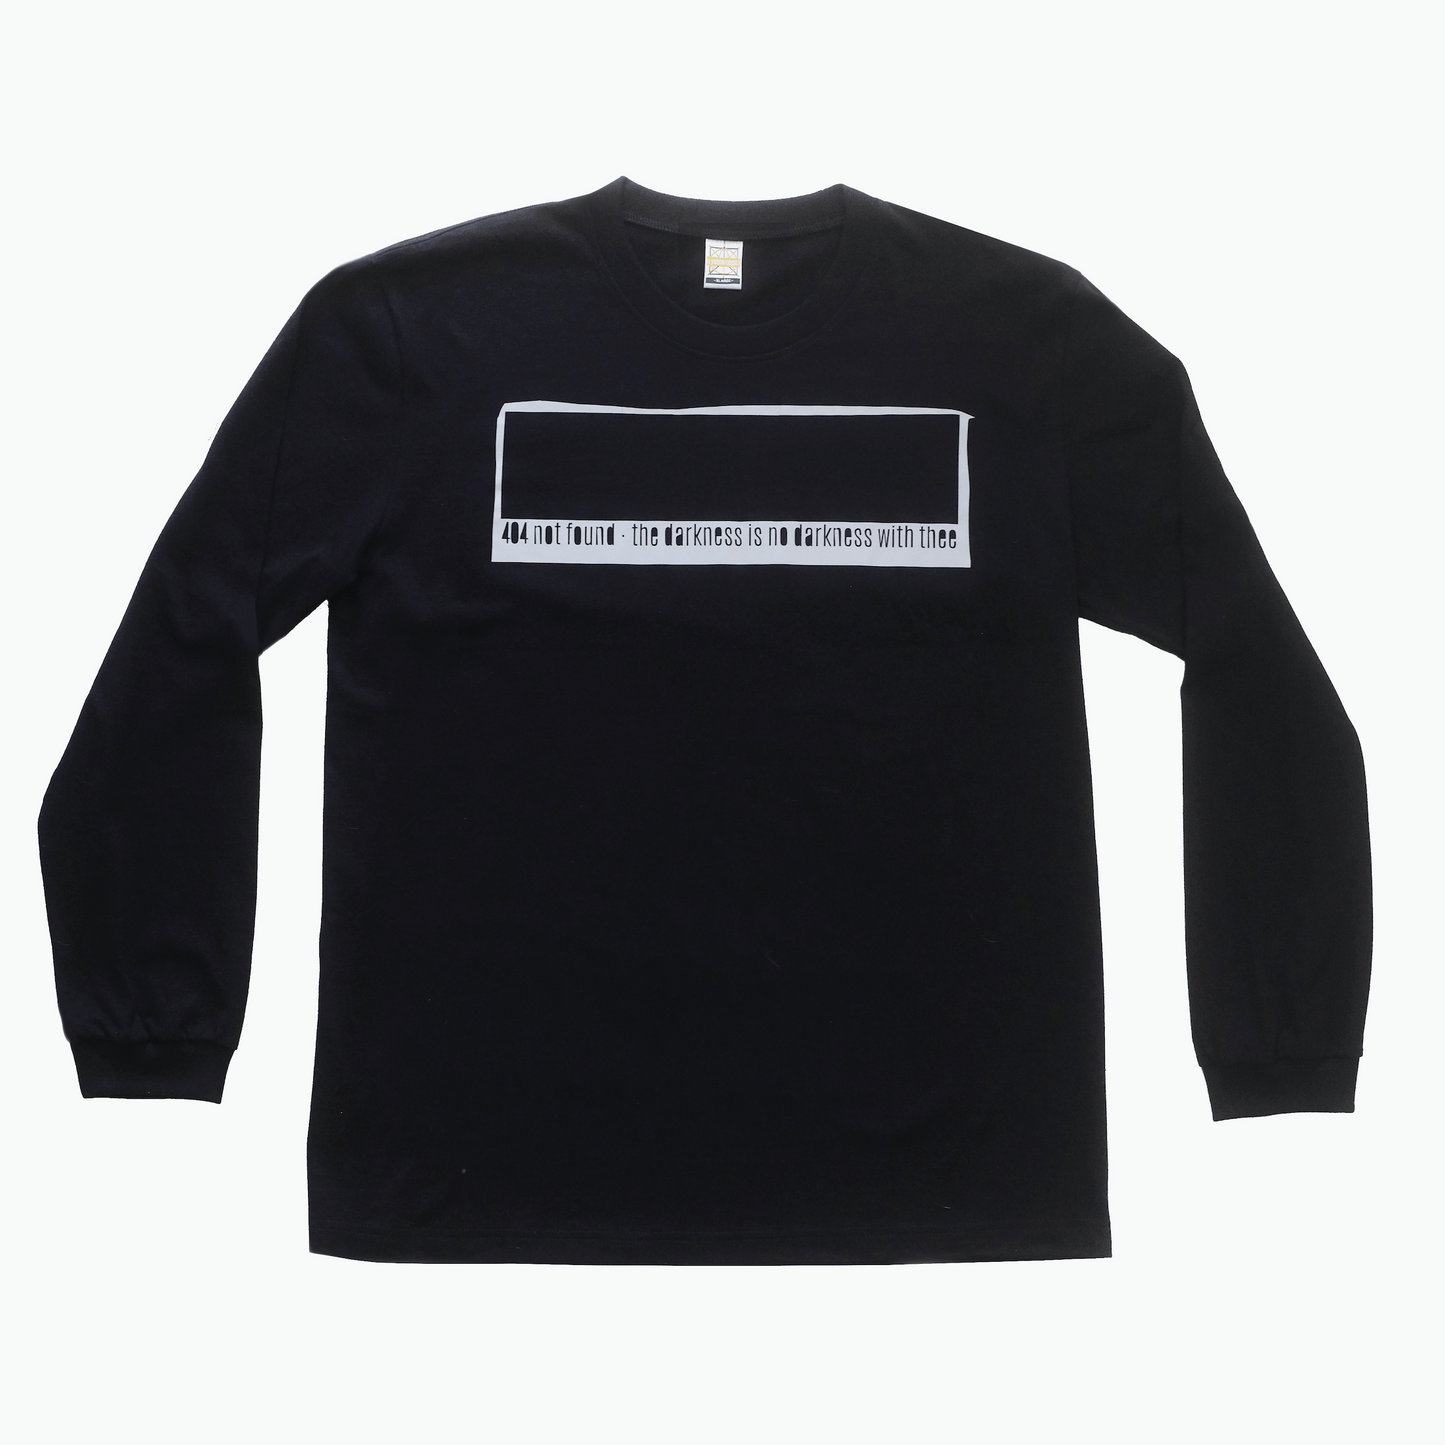 404 Not Found Long Sleeve T-Shirt (Black) - a yellow object